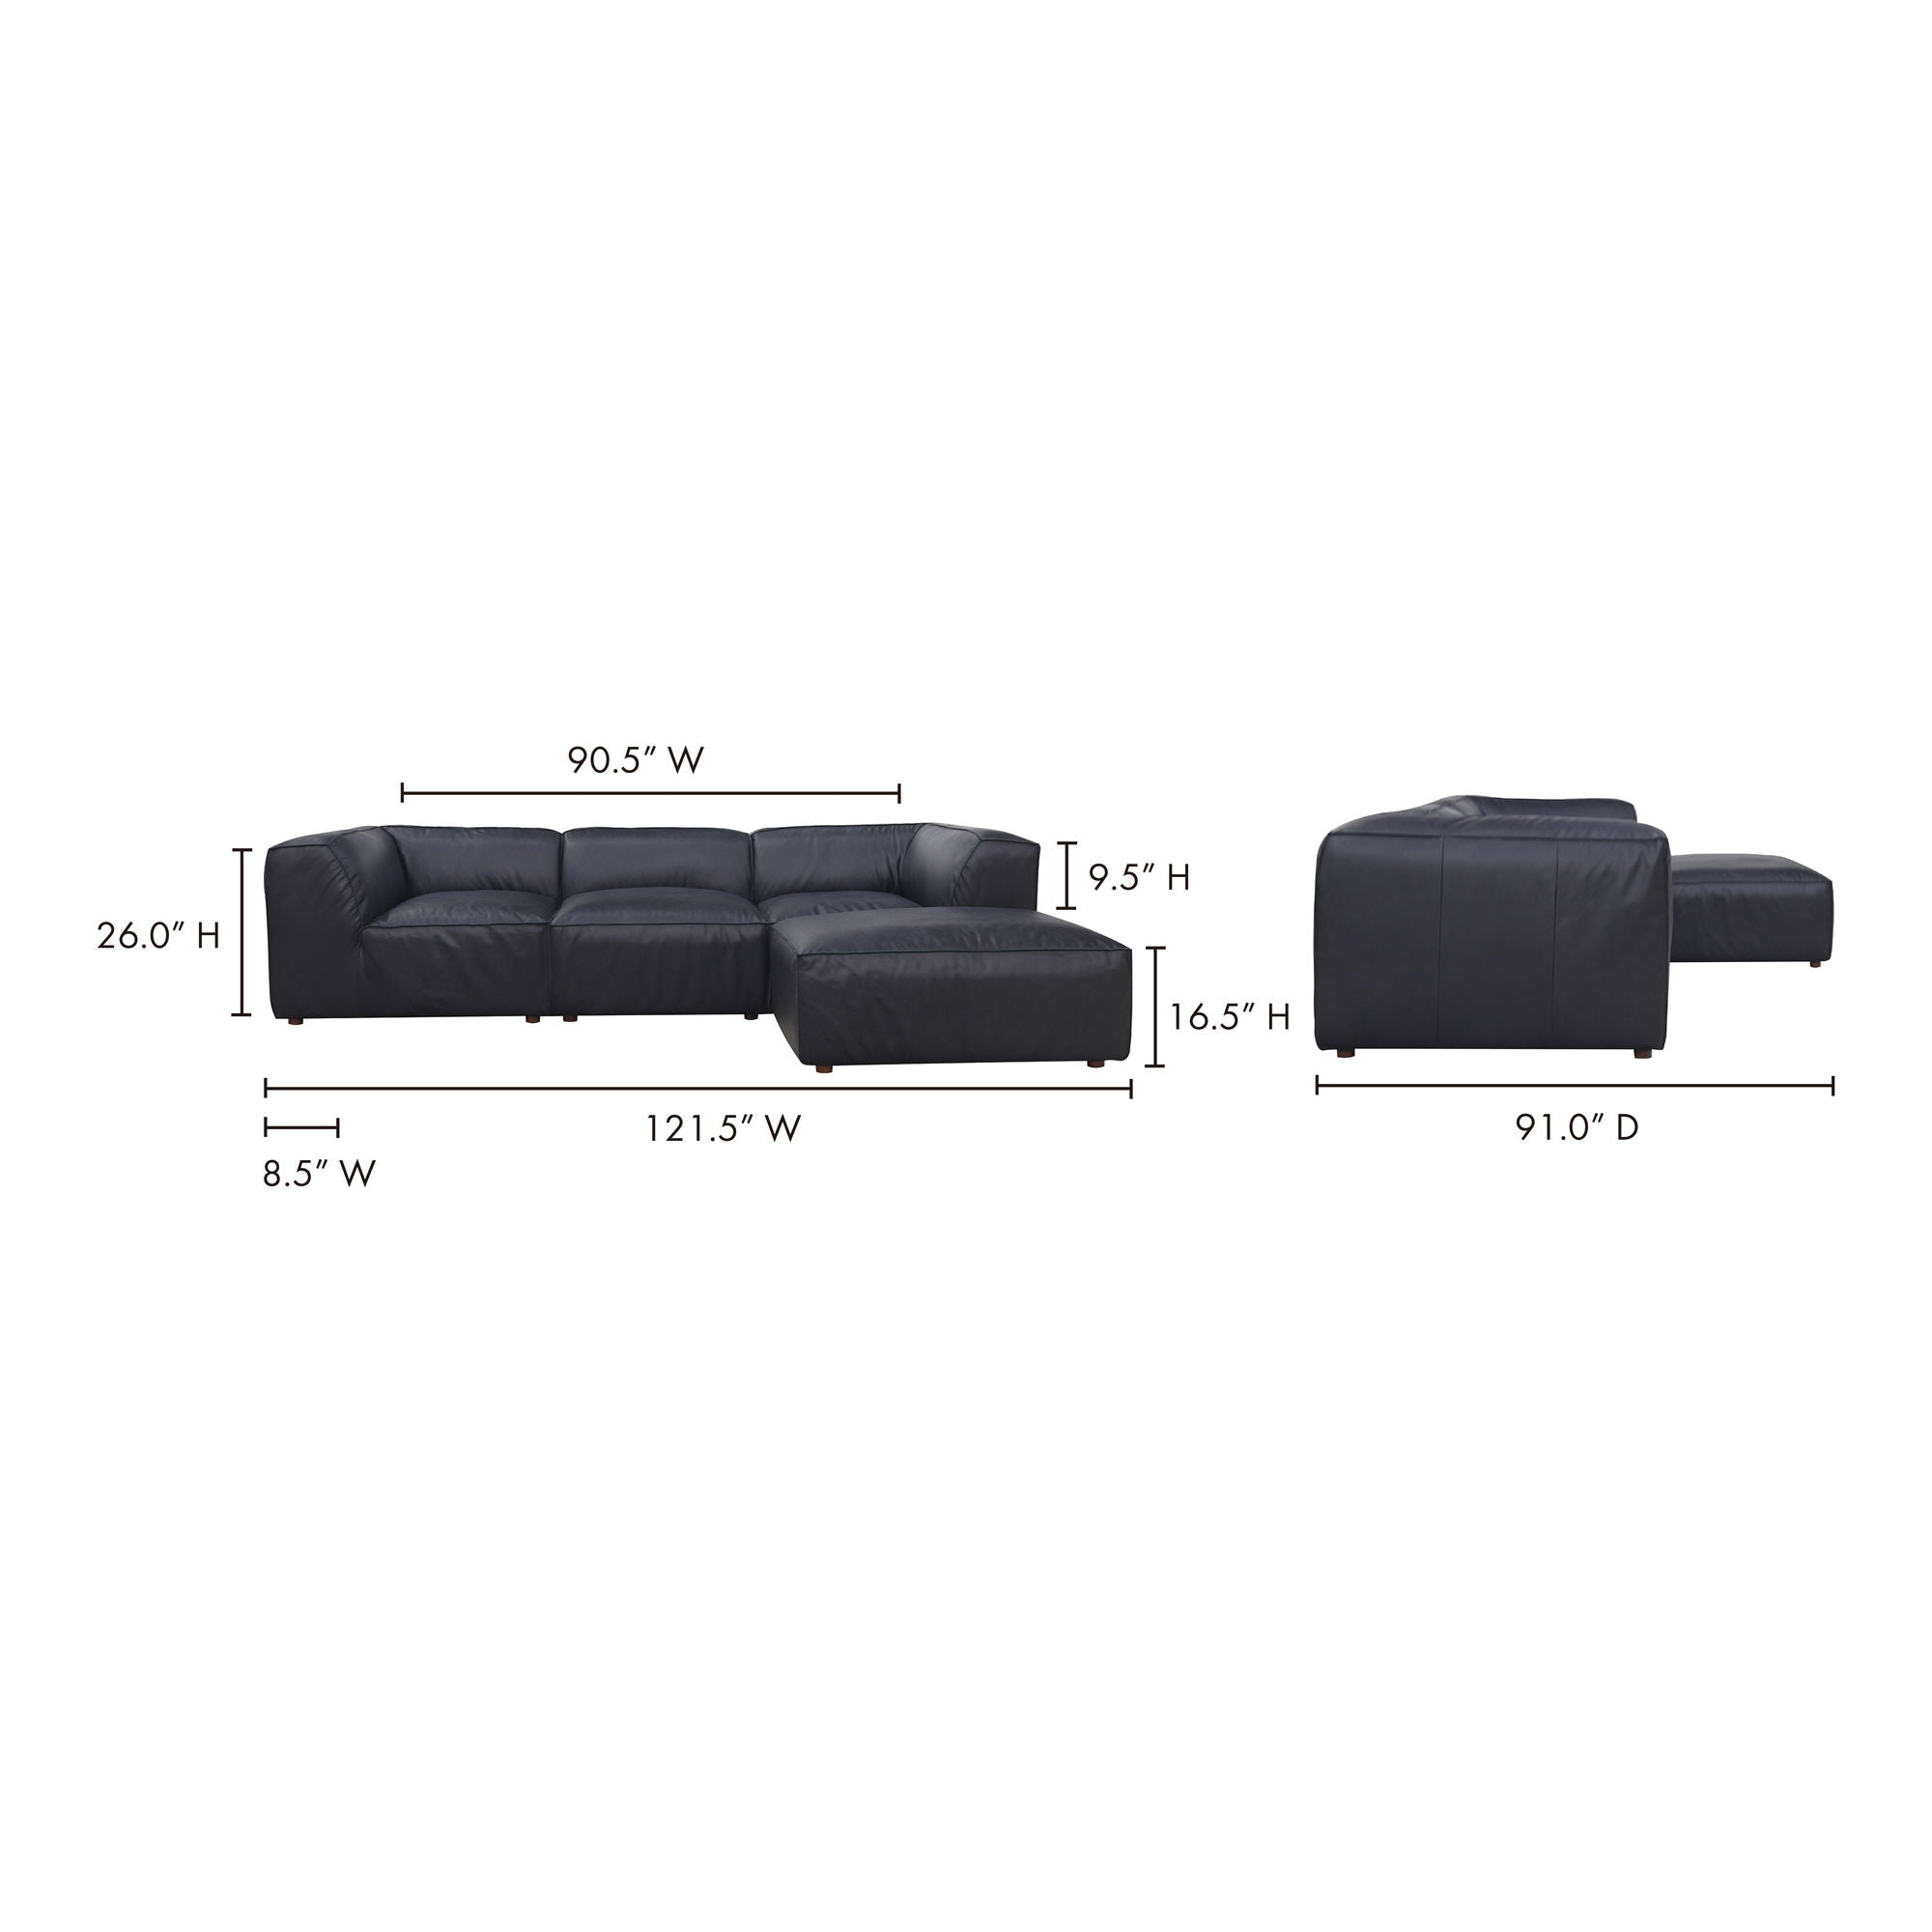 Black Leather Sectional - Modular, Cozy Form-Stationary Sectionals-American Furniture Outlet